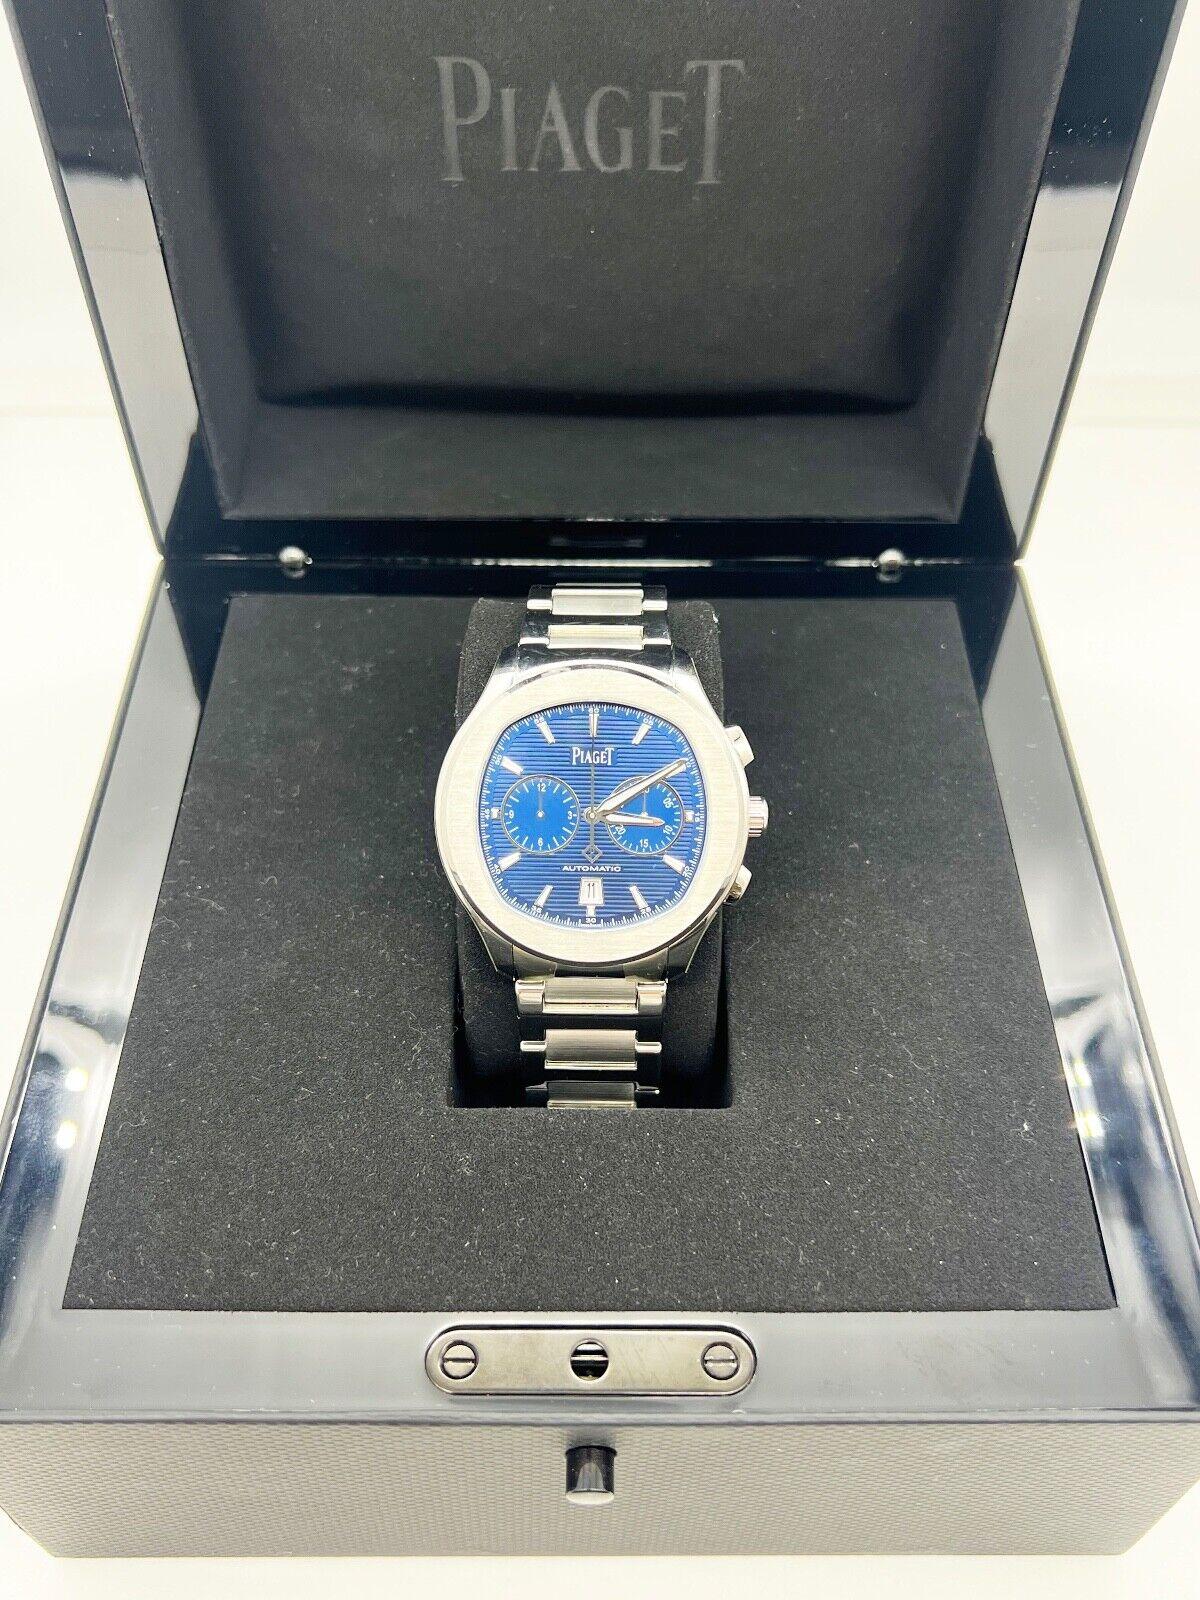 Piaget Polo G0A41006 Chronograph Blue Dial Stainless Steel Box For Sale 3